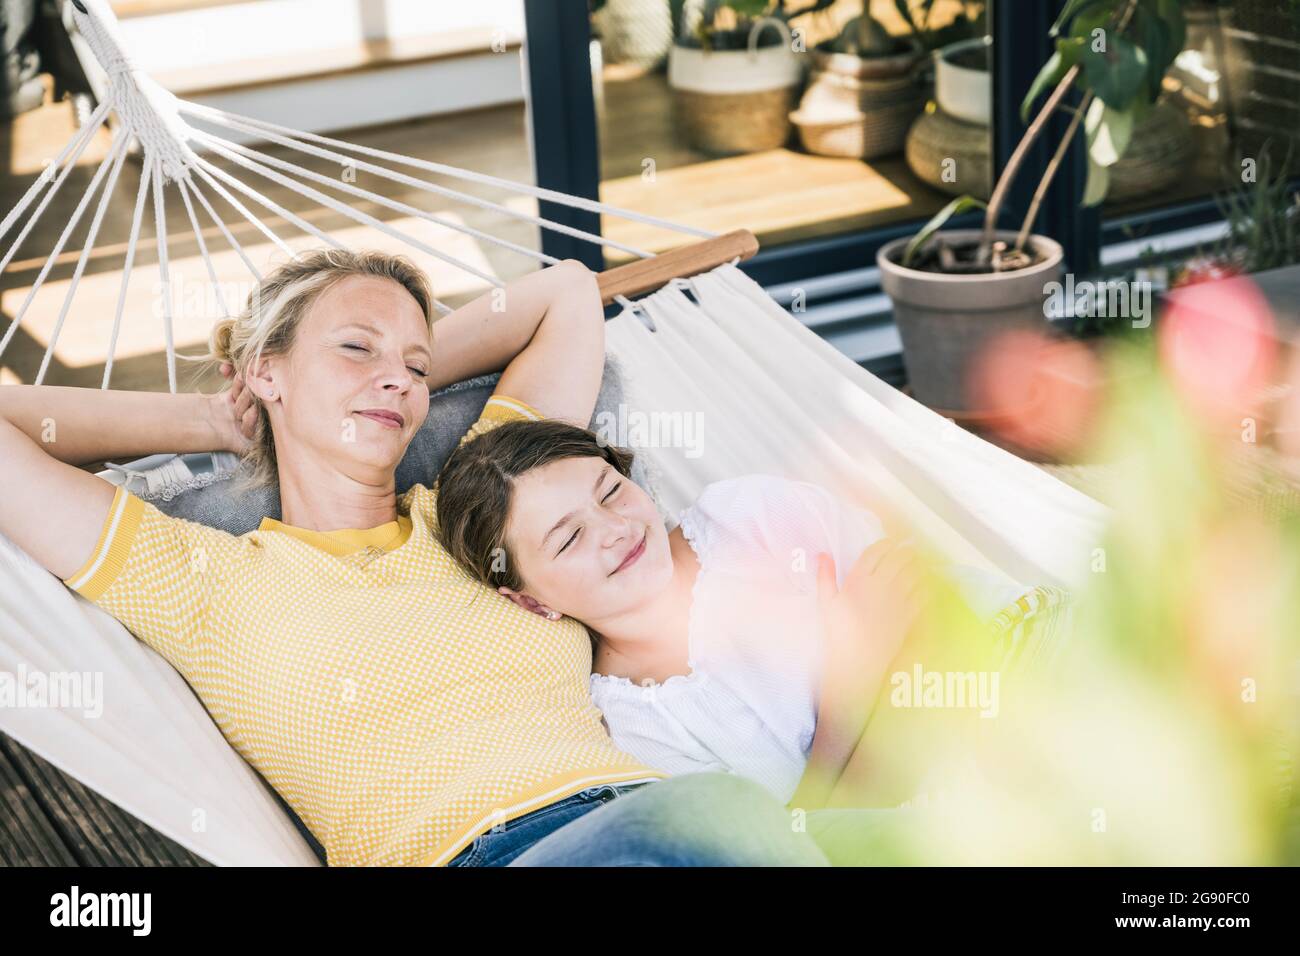 Woman and girl napping together in hammock Stock Photo